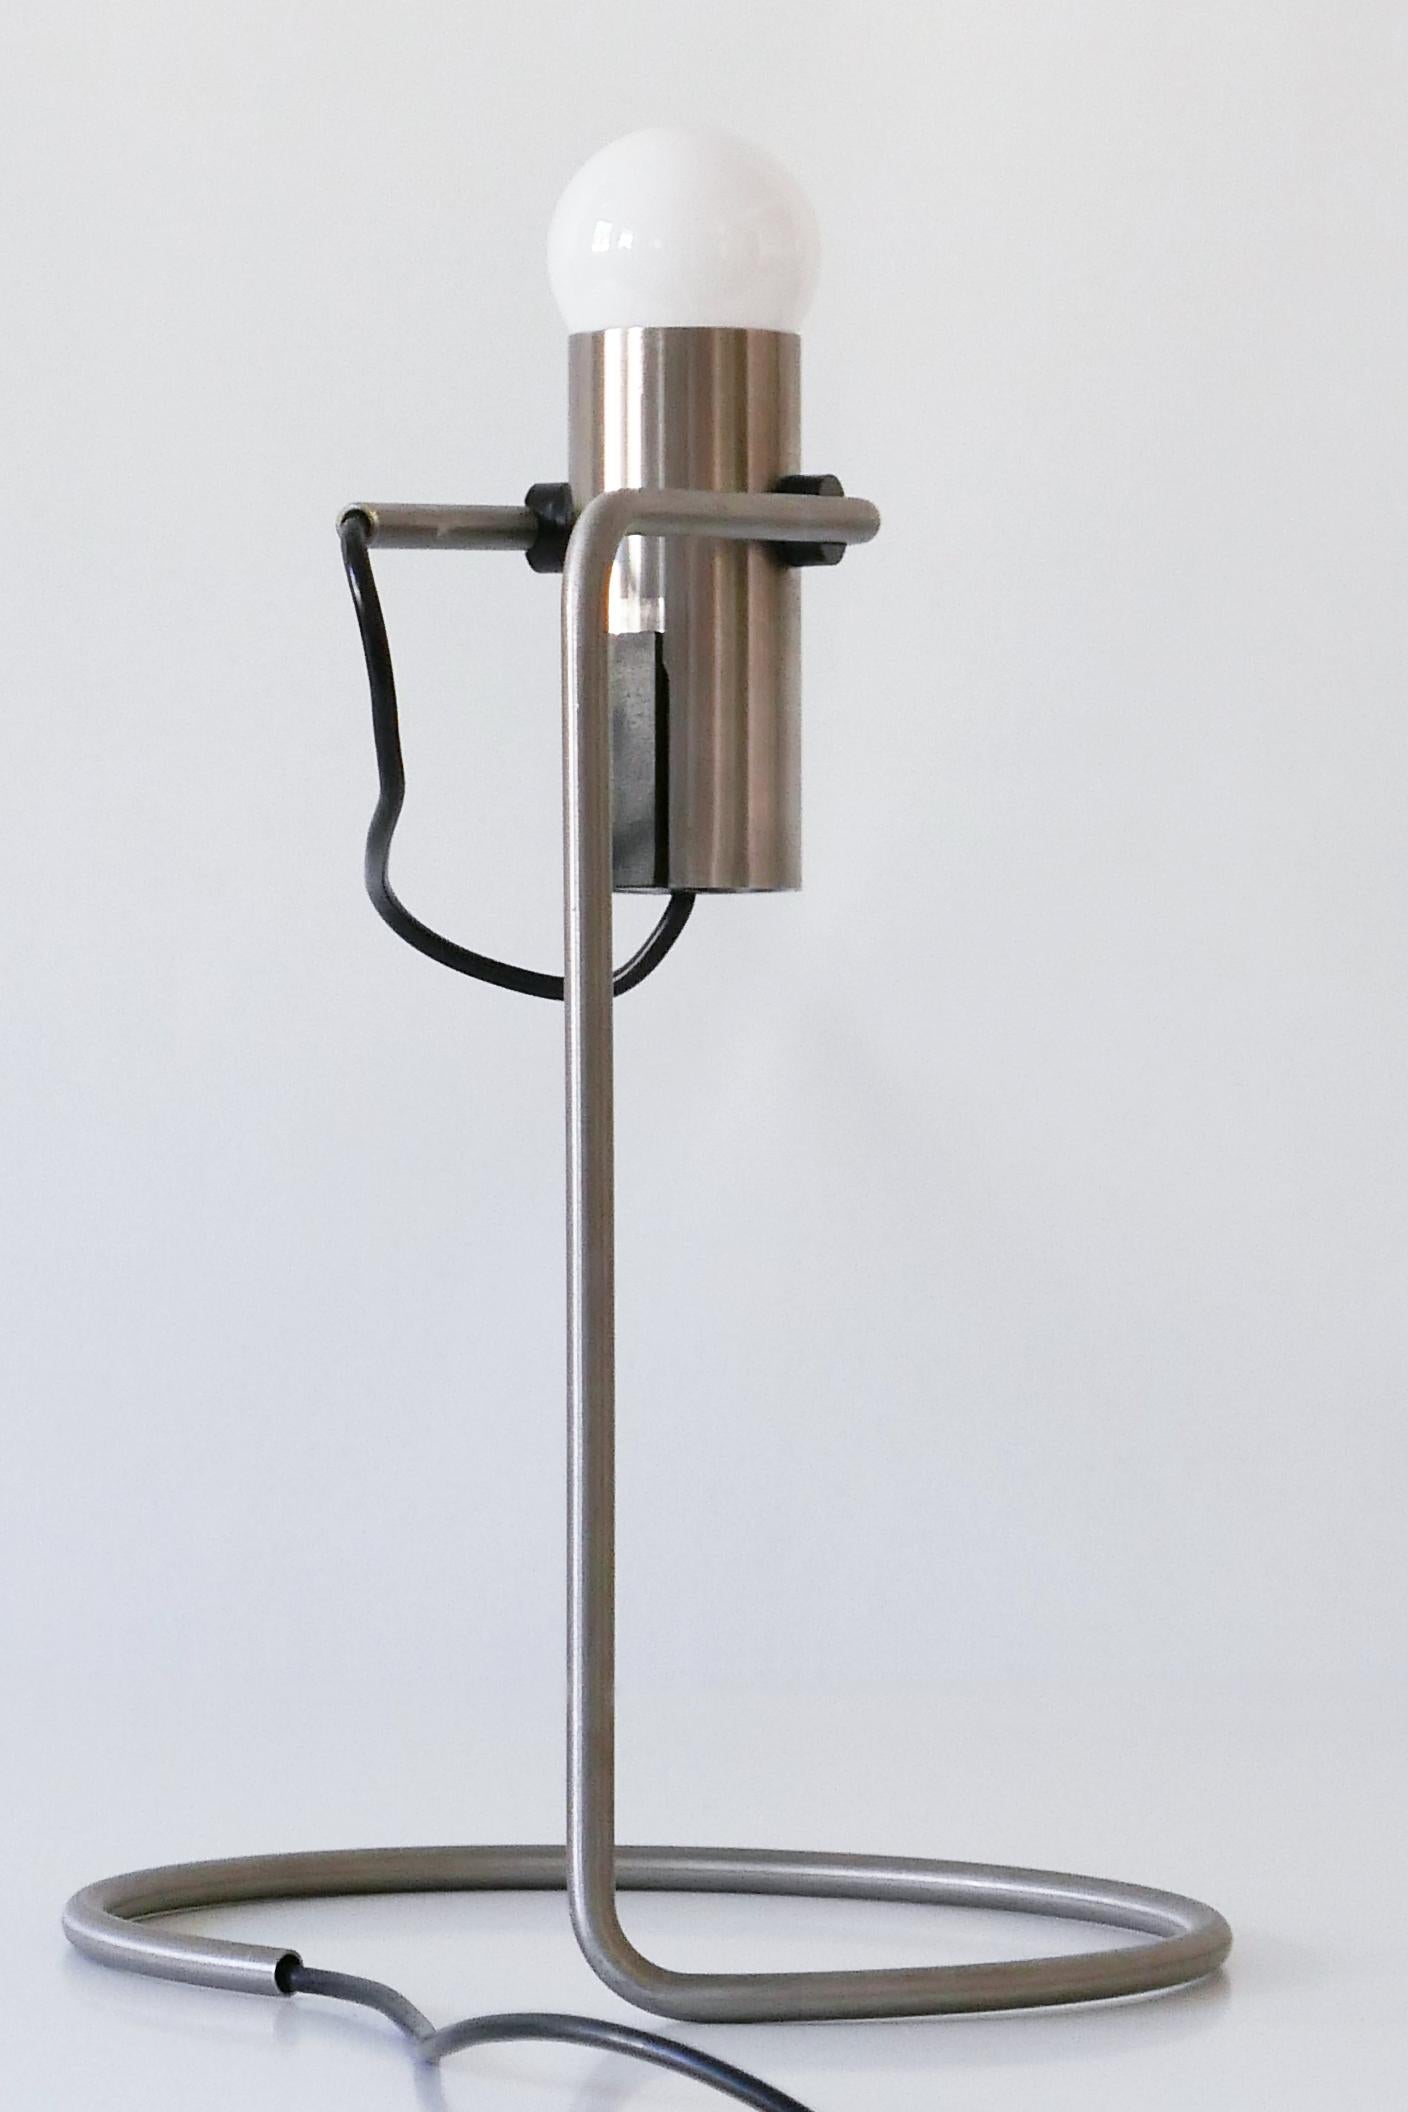 Exceptional Minimalistic Mid-Century Modern Table Lamp or Desk Light, 1960s For Sale 5